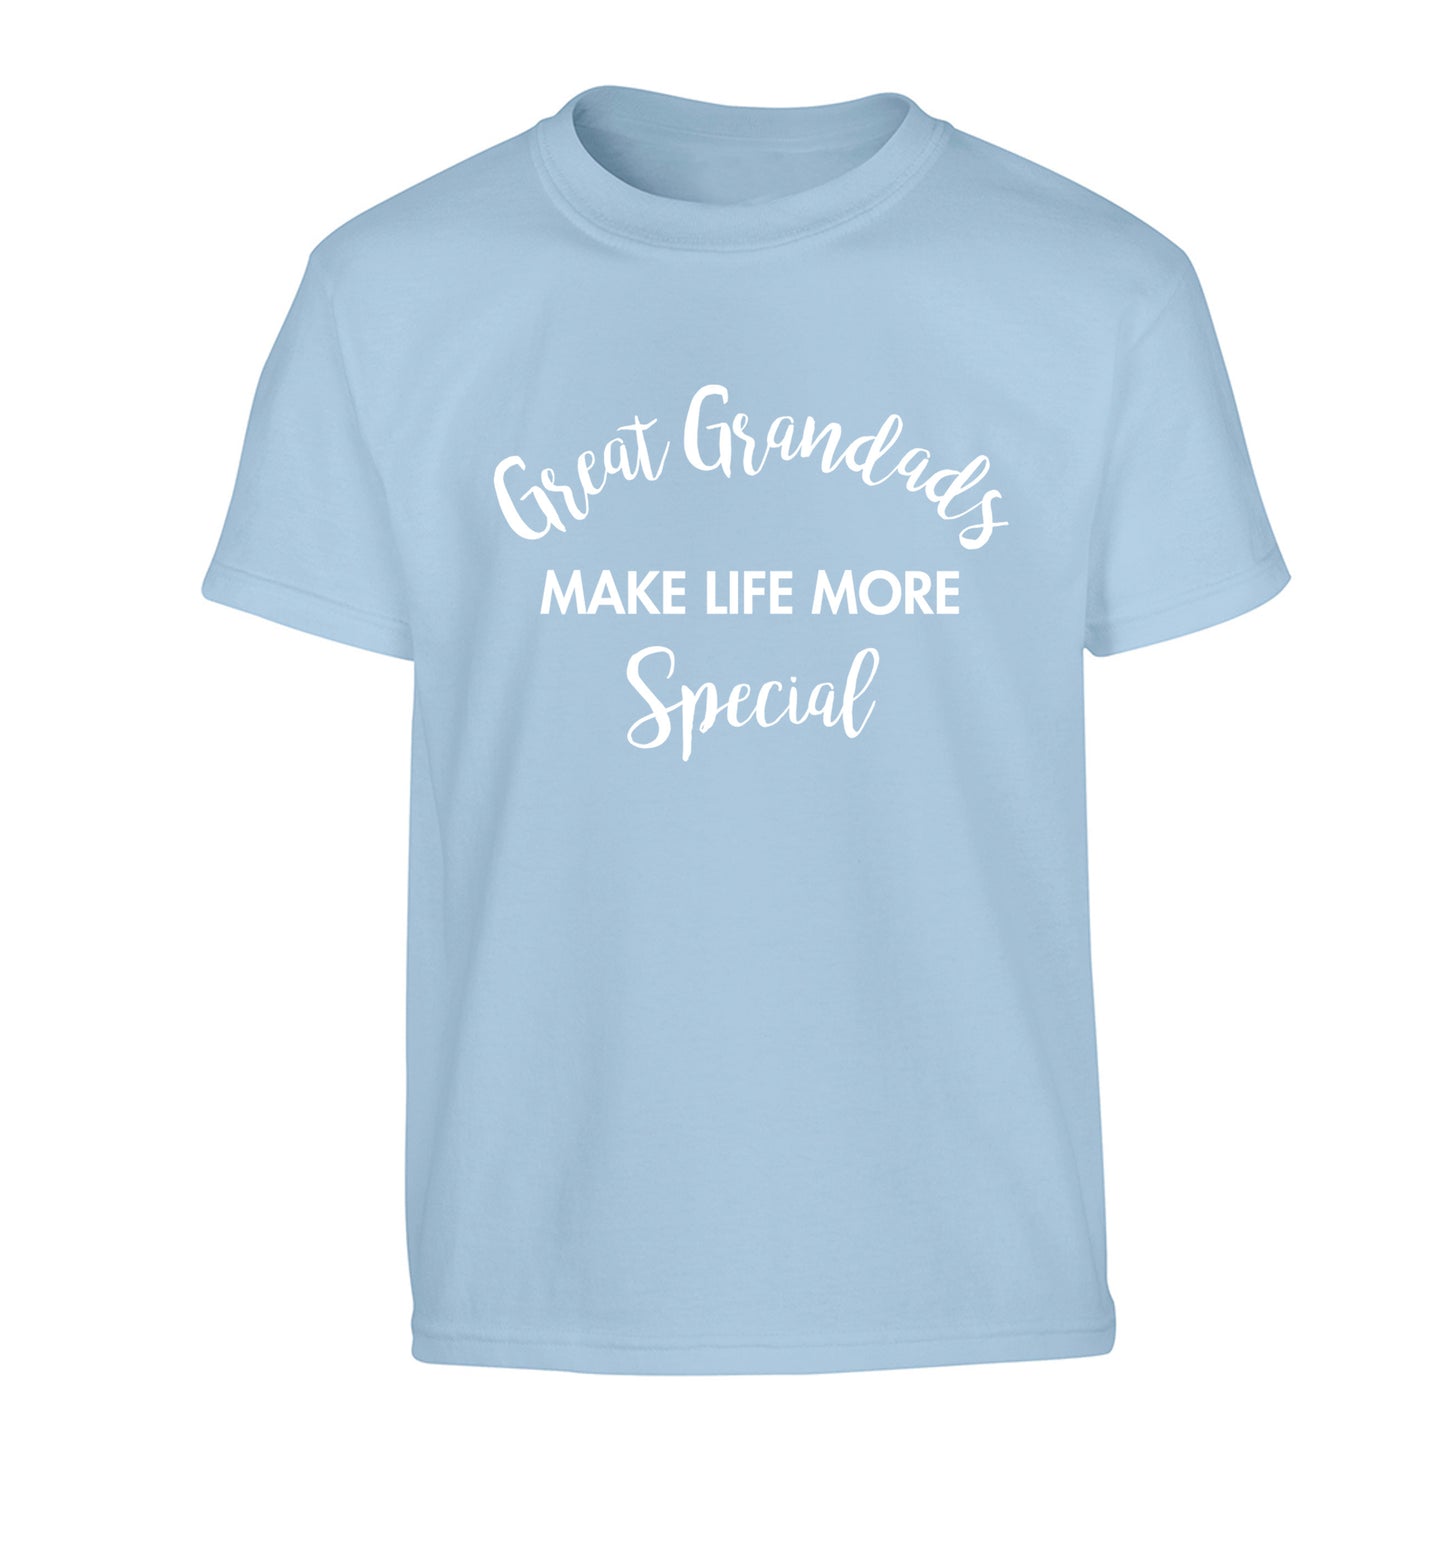 Great Grandads make life more special Children's light blue Tshirt 12-14 Years